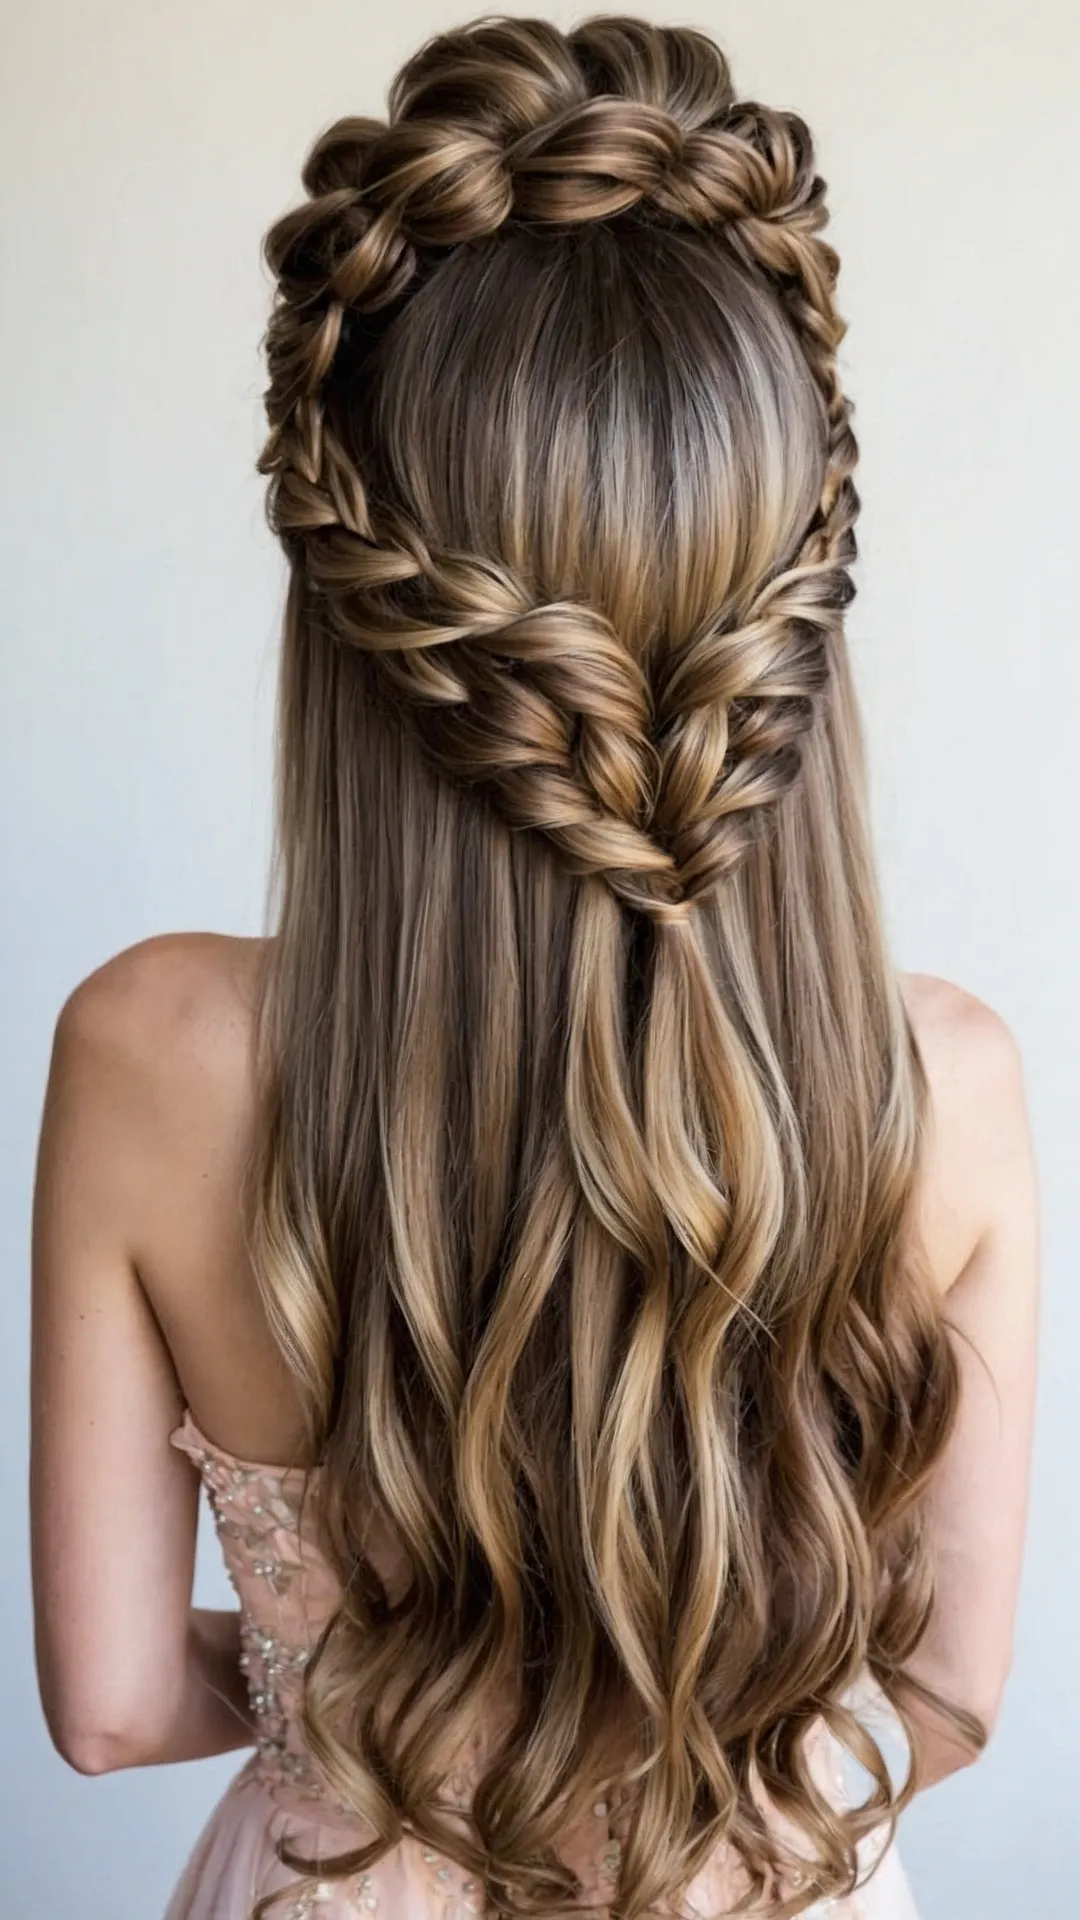 Siren Song Styles: Prom Hairstyles for Long Hair Goals